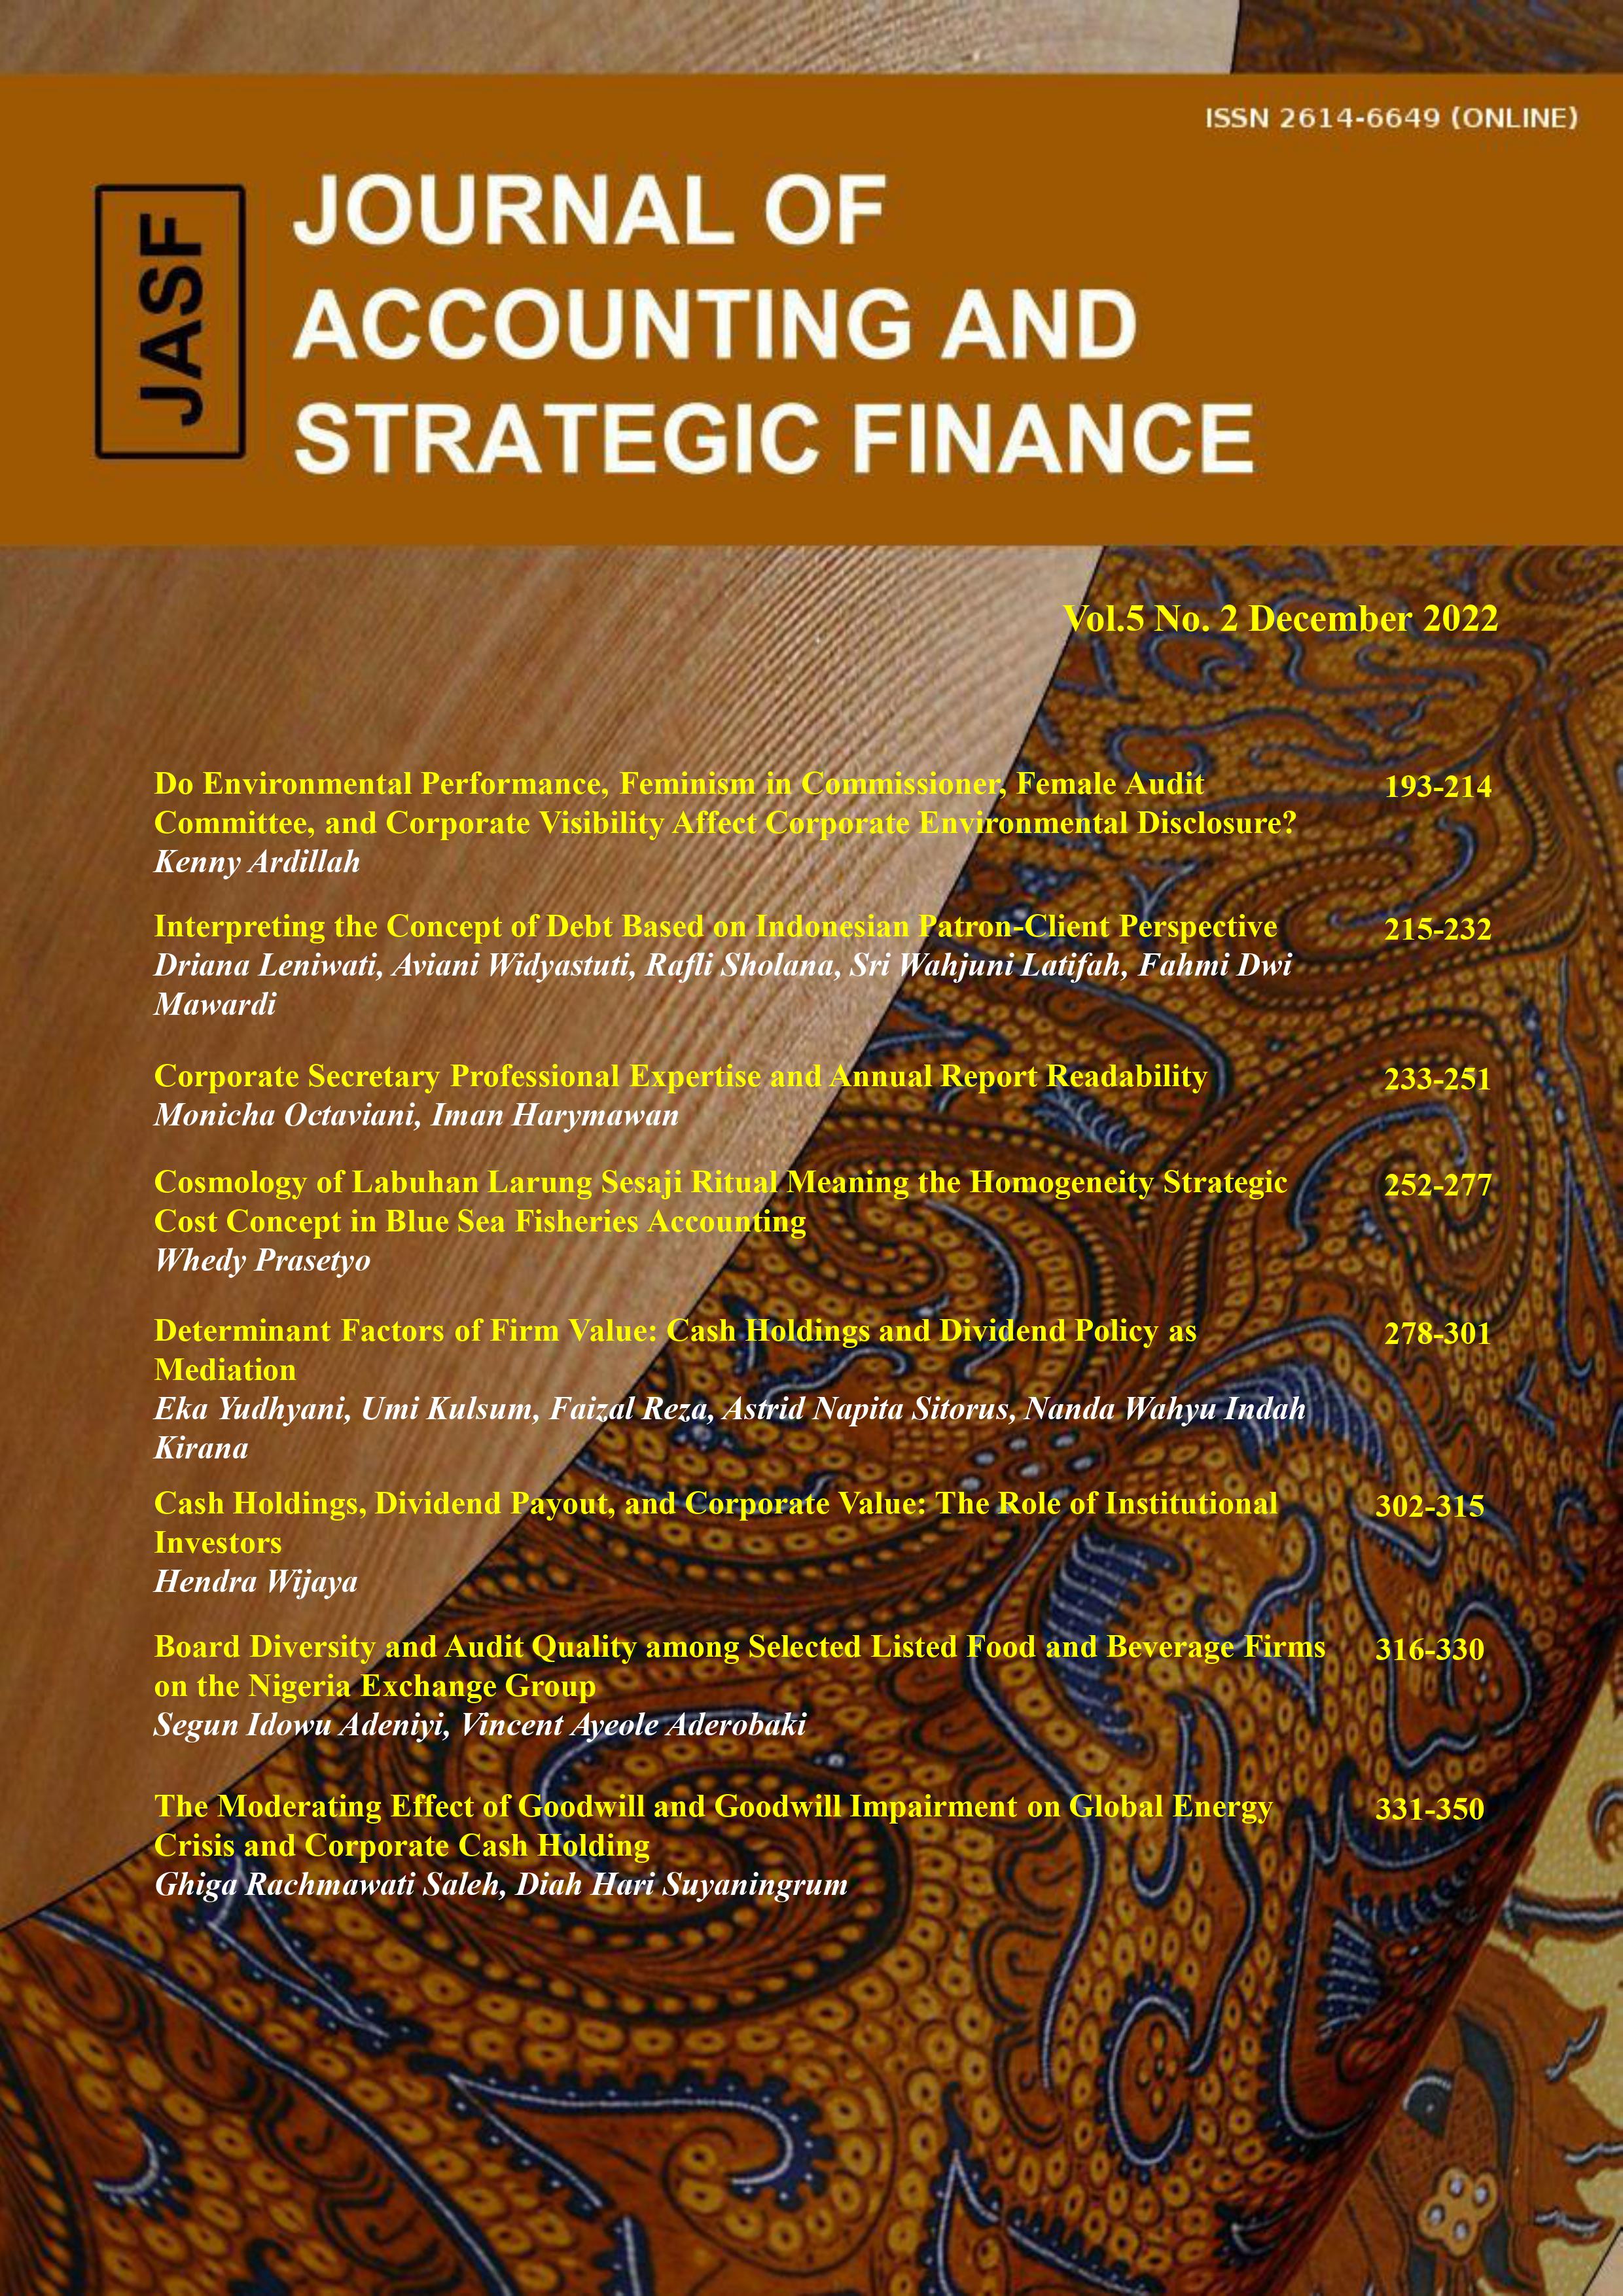 					View Vol. 5 No. 2 (2022): JASF (Journal of Accounting and Strategic Finance) - December 2022
				